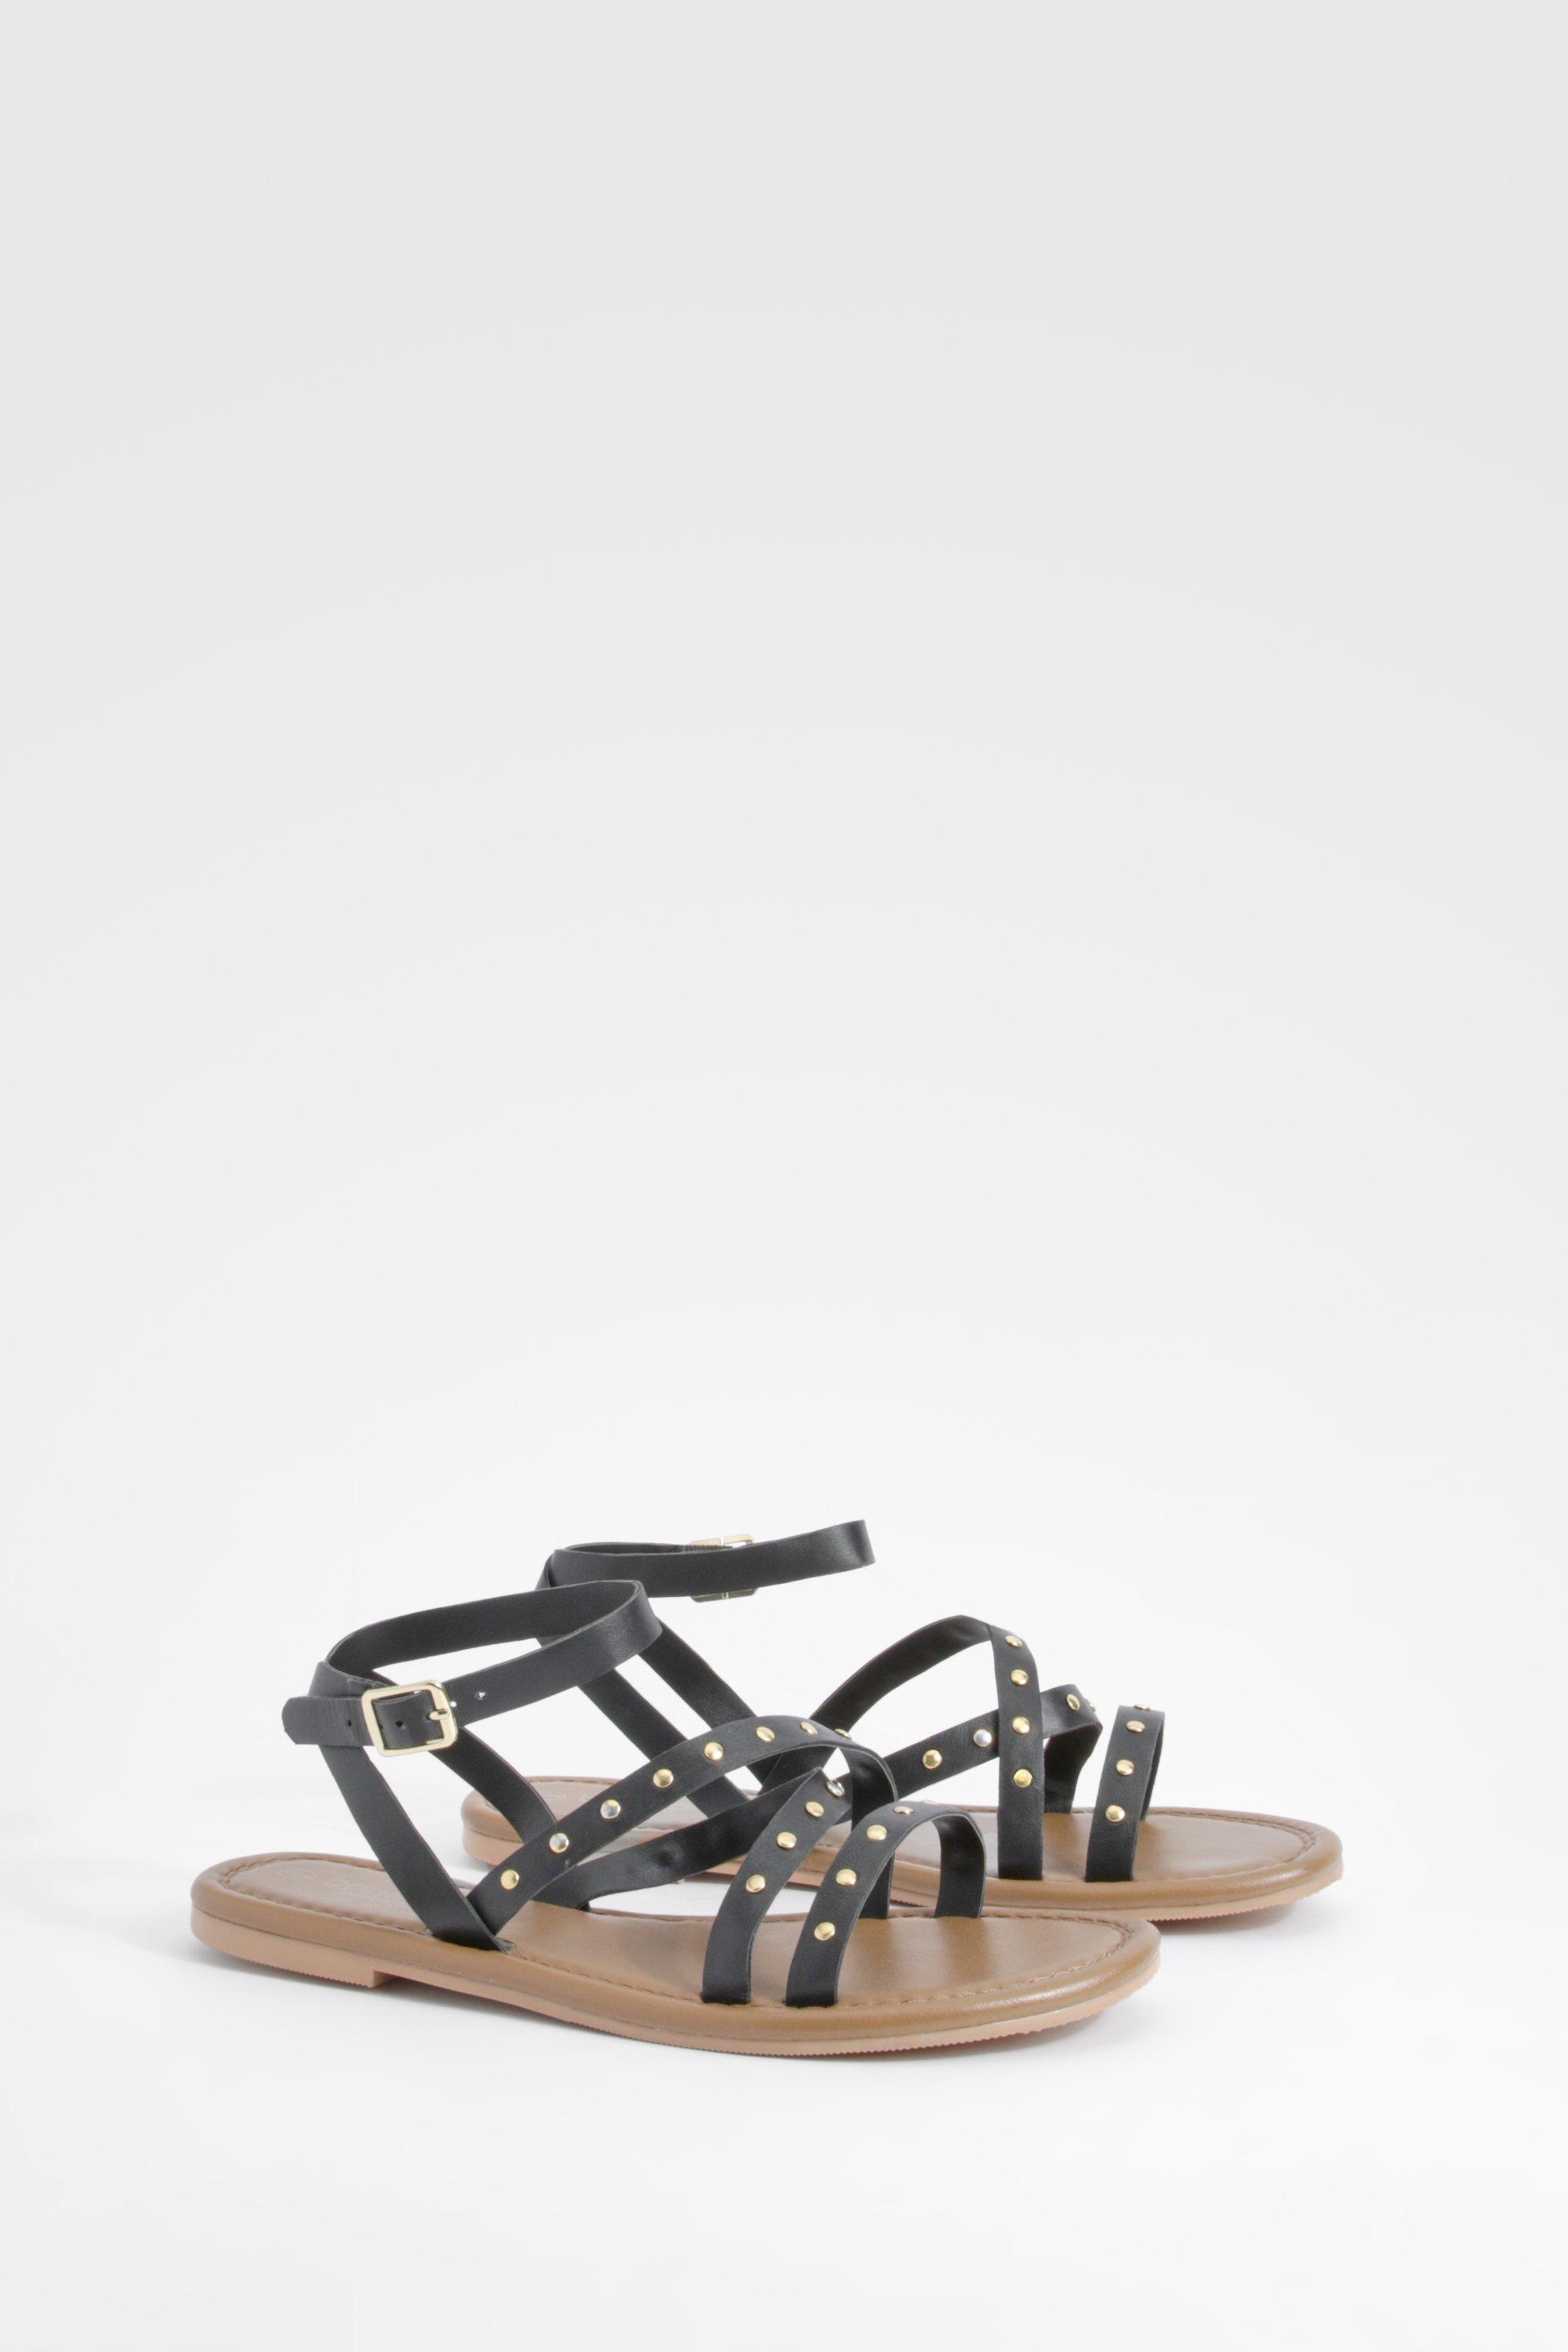 Image of Wide Fit Leather Studded 2 Part Sandals, Nero